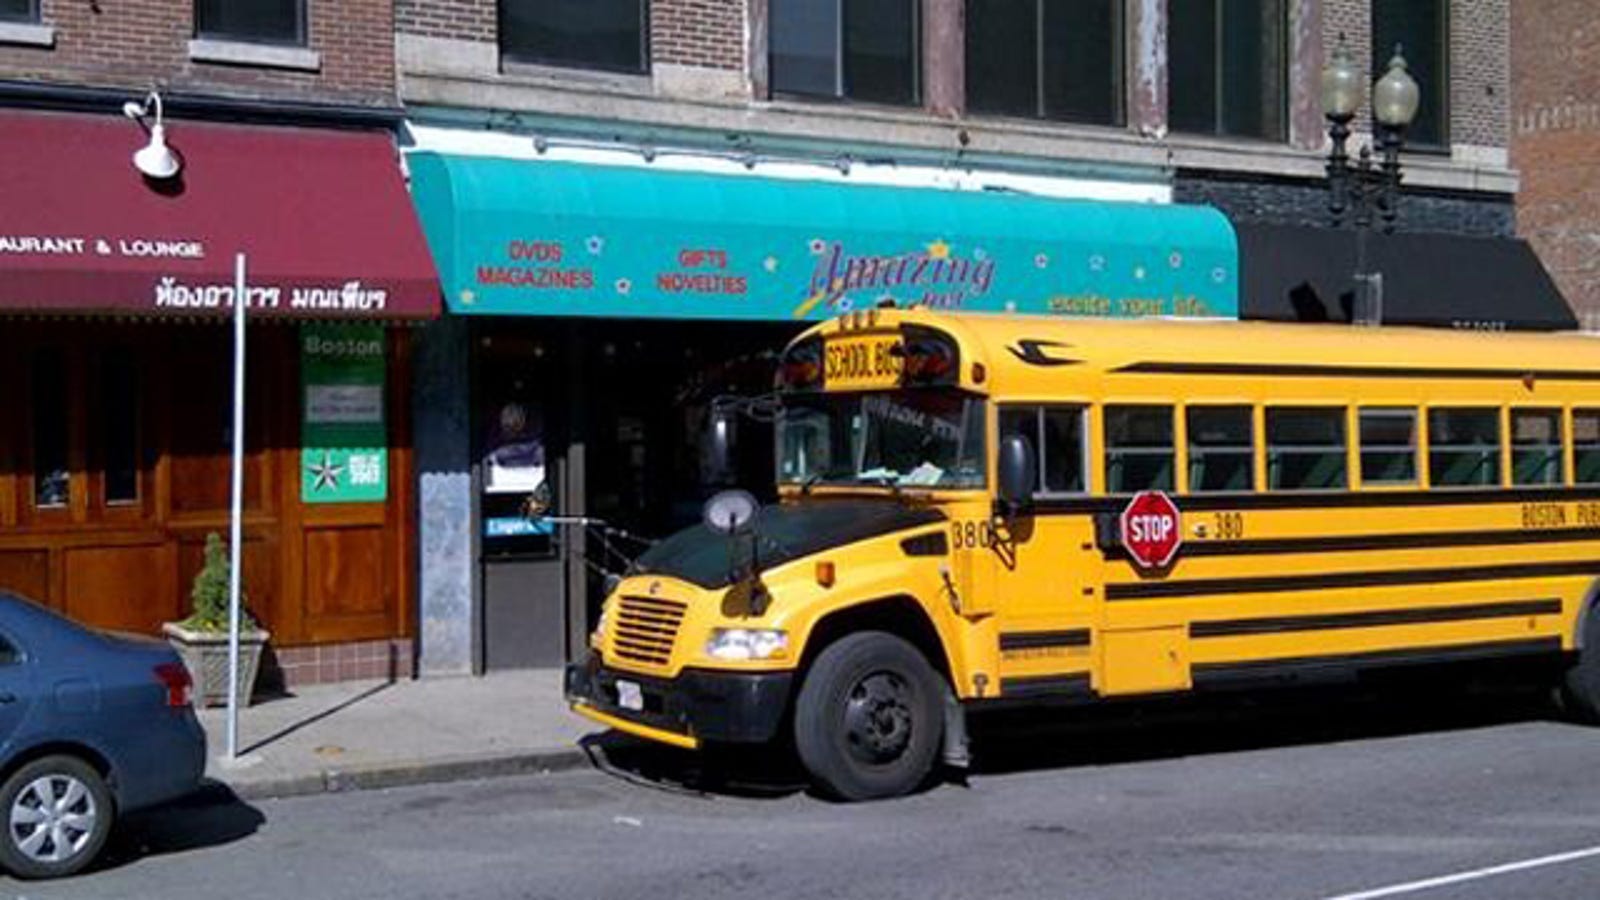 Public School Bus Porn - This Is A School Bus Parked In Front Of A Porn Store